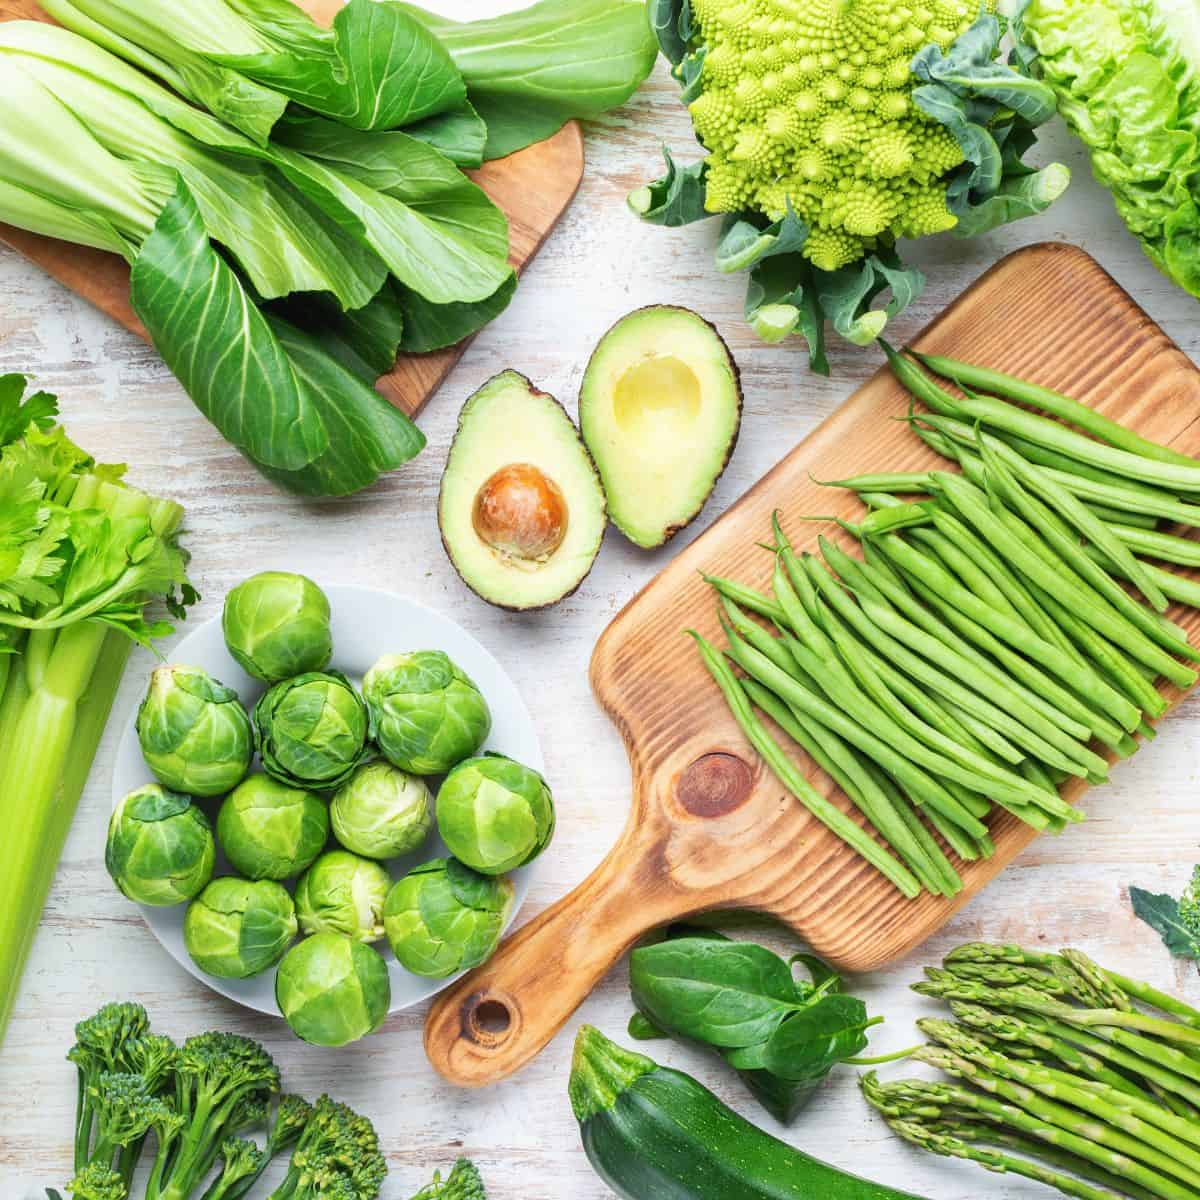 Vegetables to Include and Avoid during Your Keto Diet